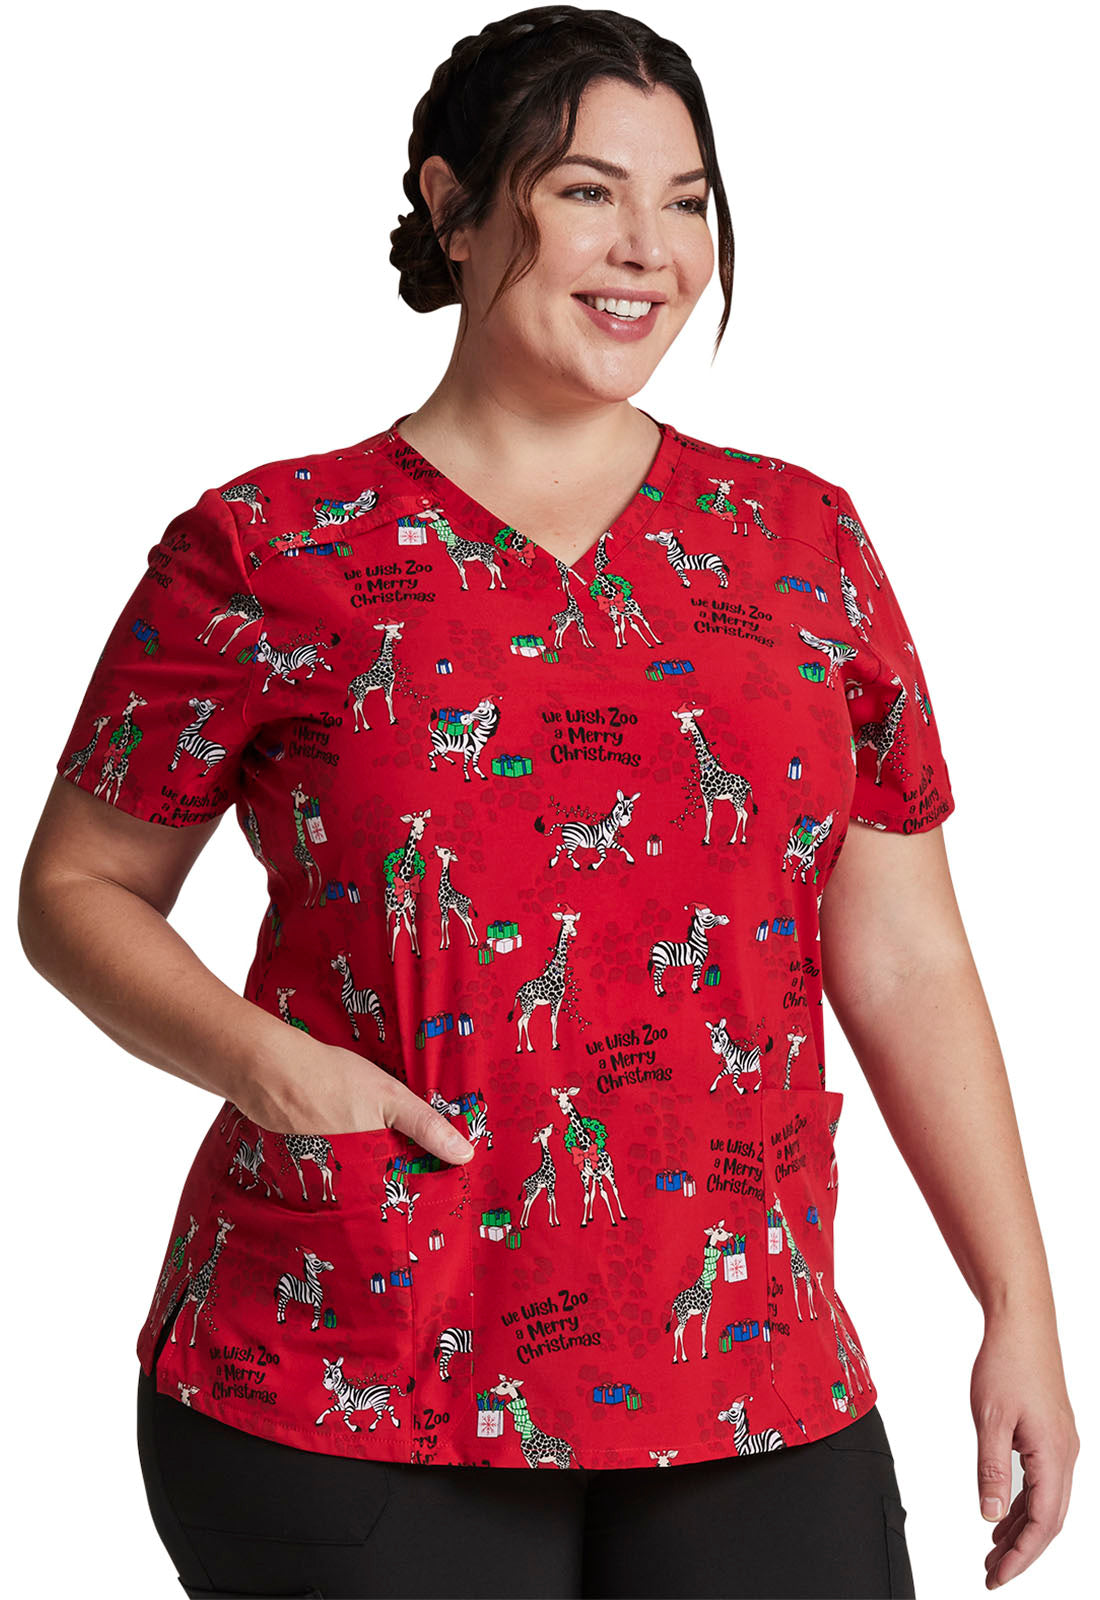 V-Neck Print Top in Wish Zoo A Merry Christmas  DK616 WZMC